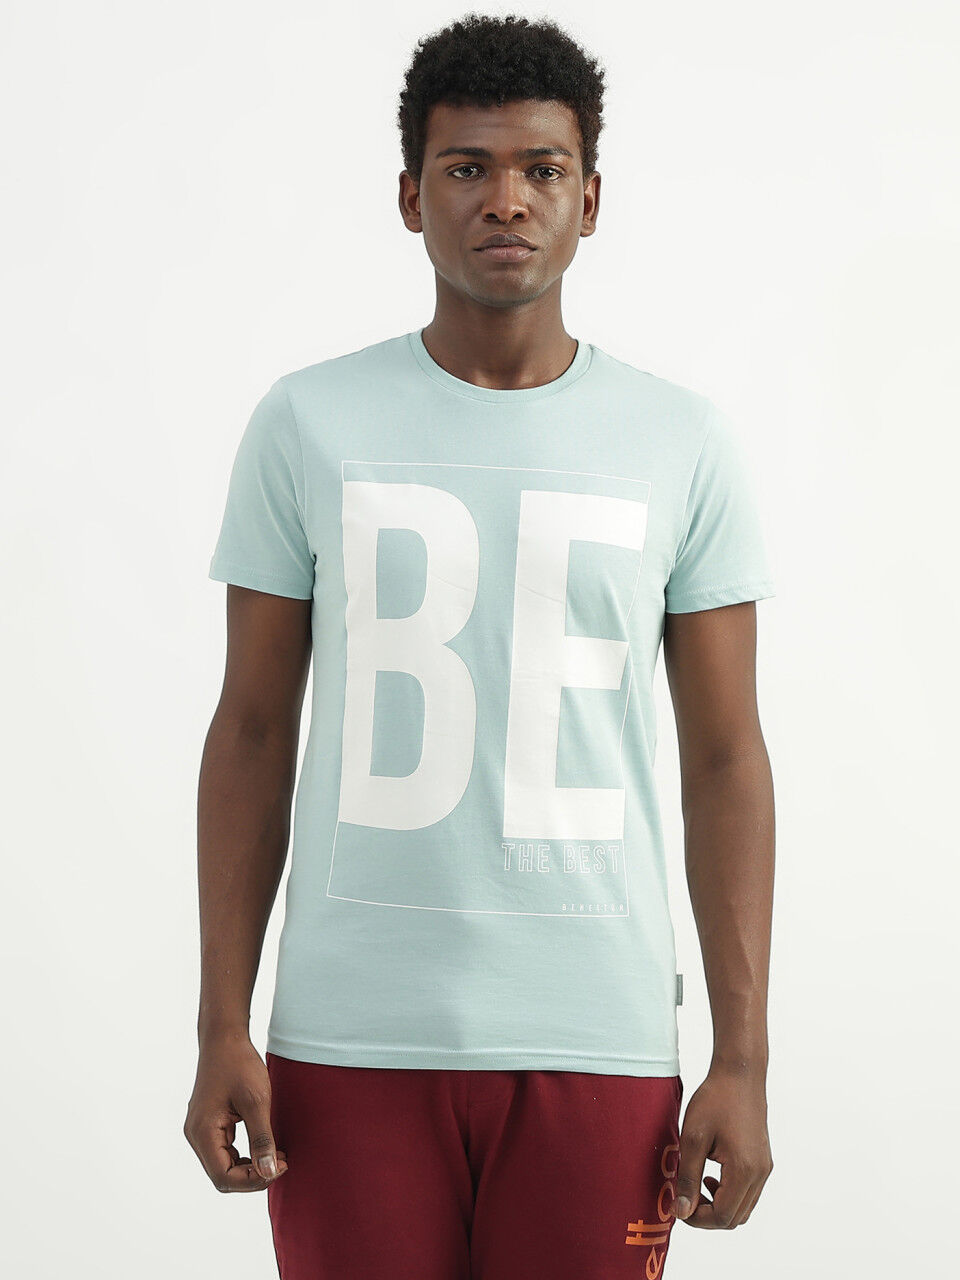 Men's T-shirts New Collection 2021 | Benetton